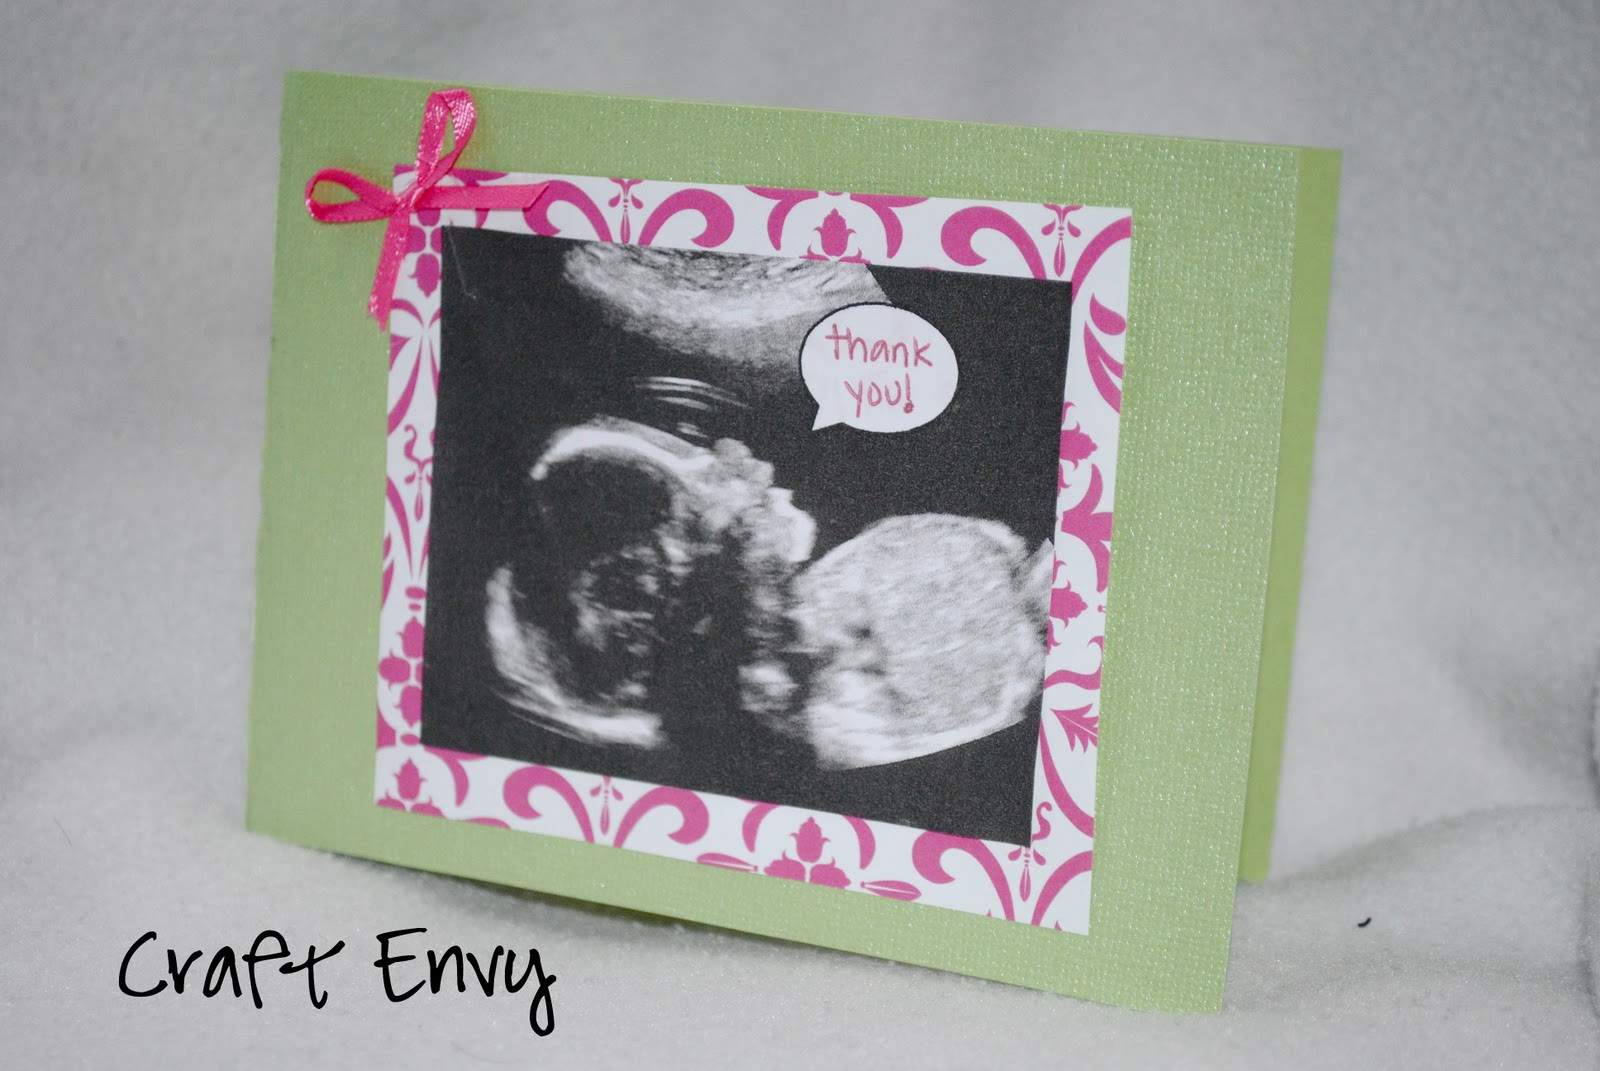 DIY Baby Shower Thank You Cards
 Craft Envy Baby Shower "Thank You" Cards